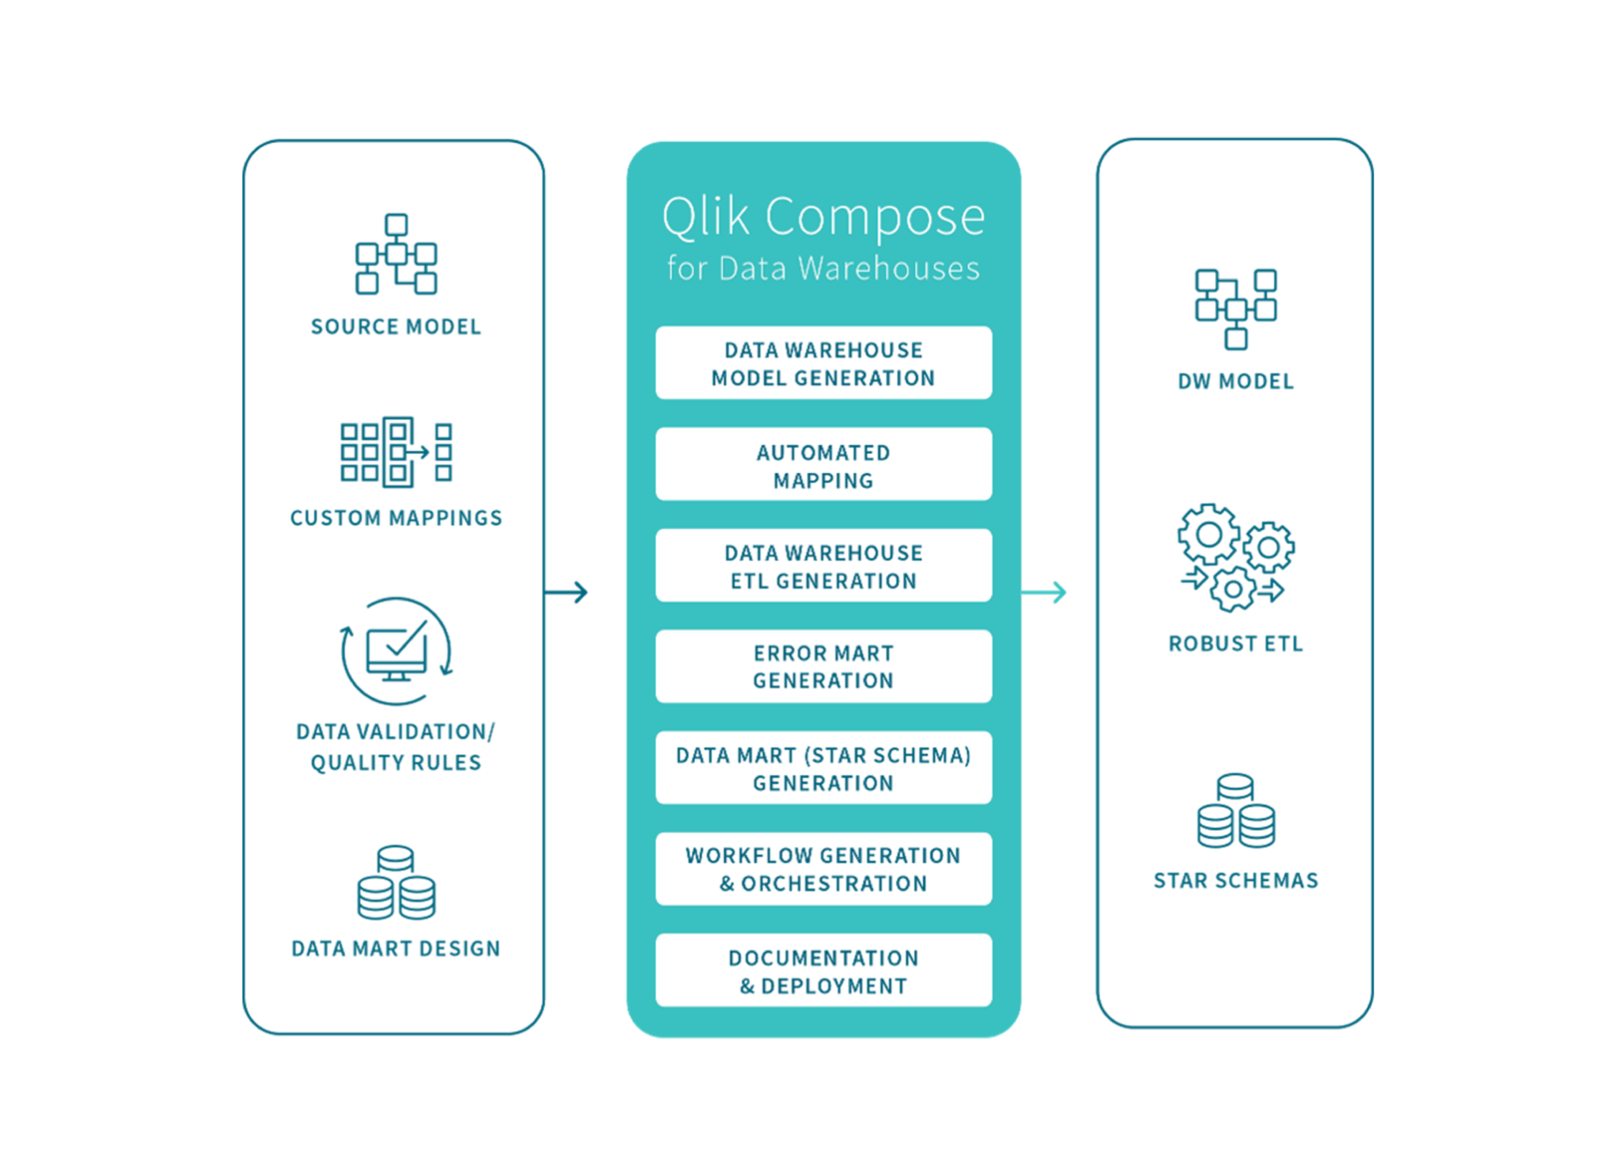 architecture and capabilities of Qlik Compose for data warehouse automation